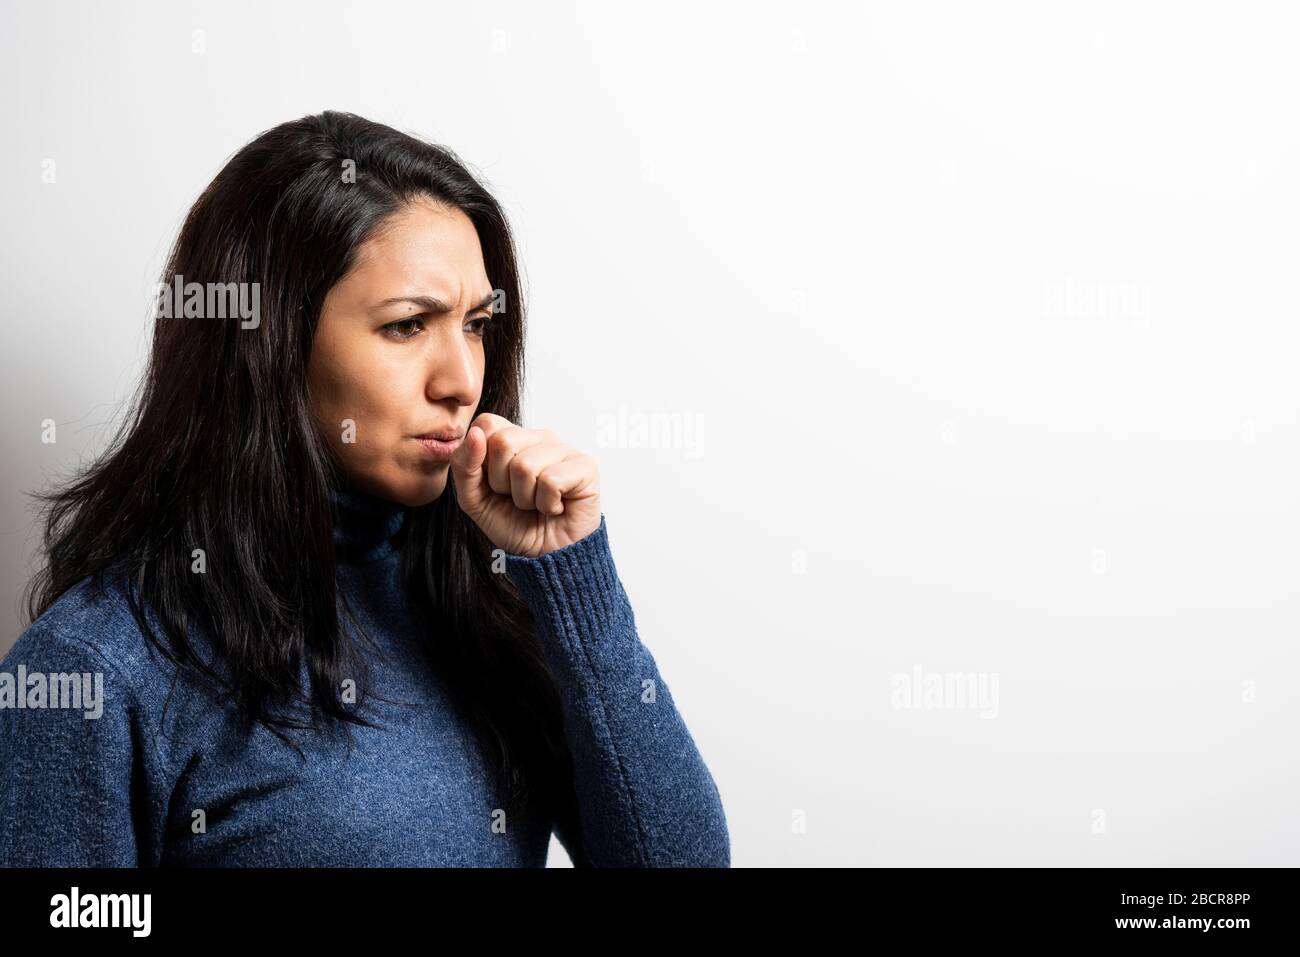 young woman coughing on a white background. Stock Photo